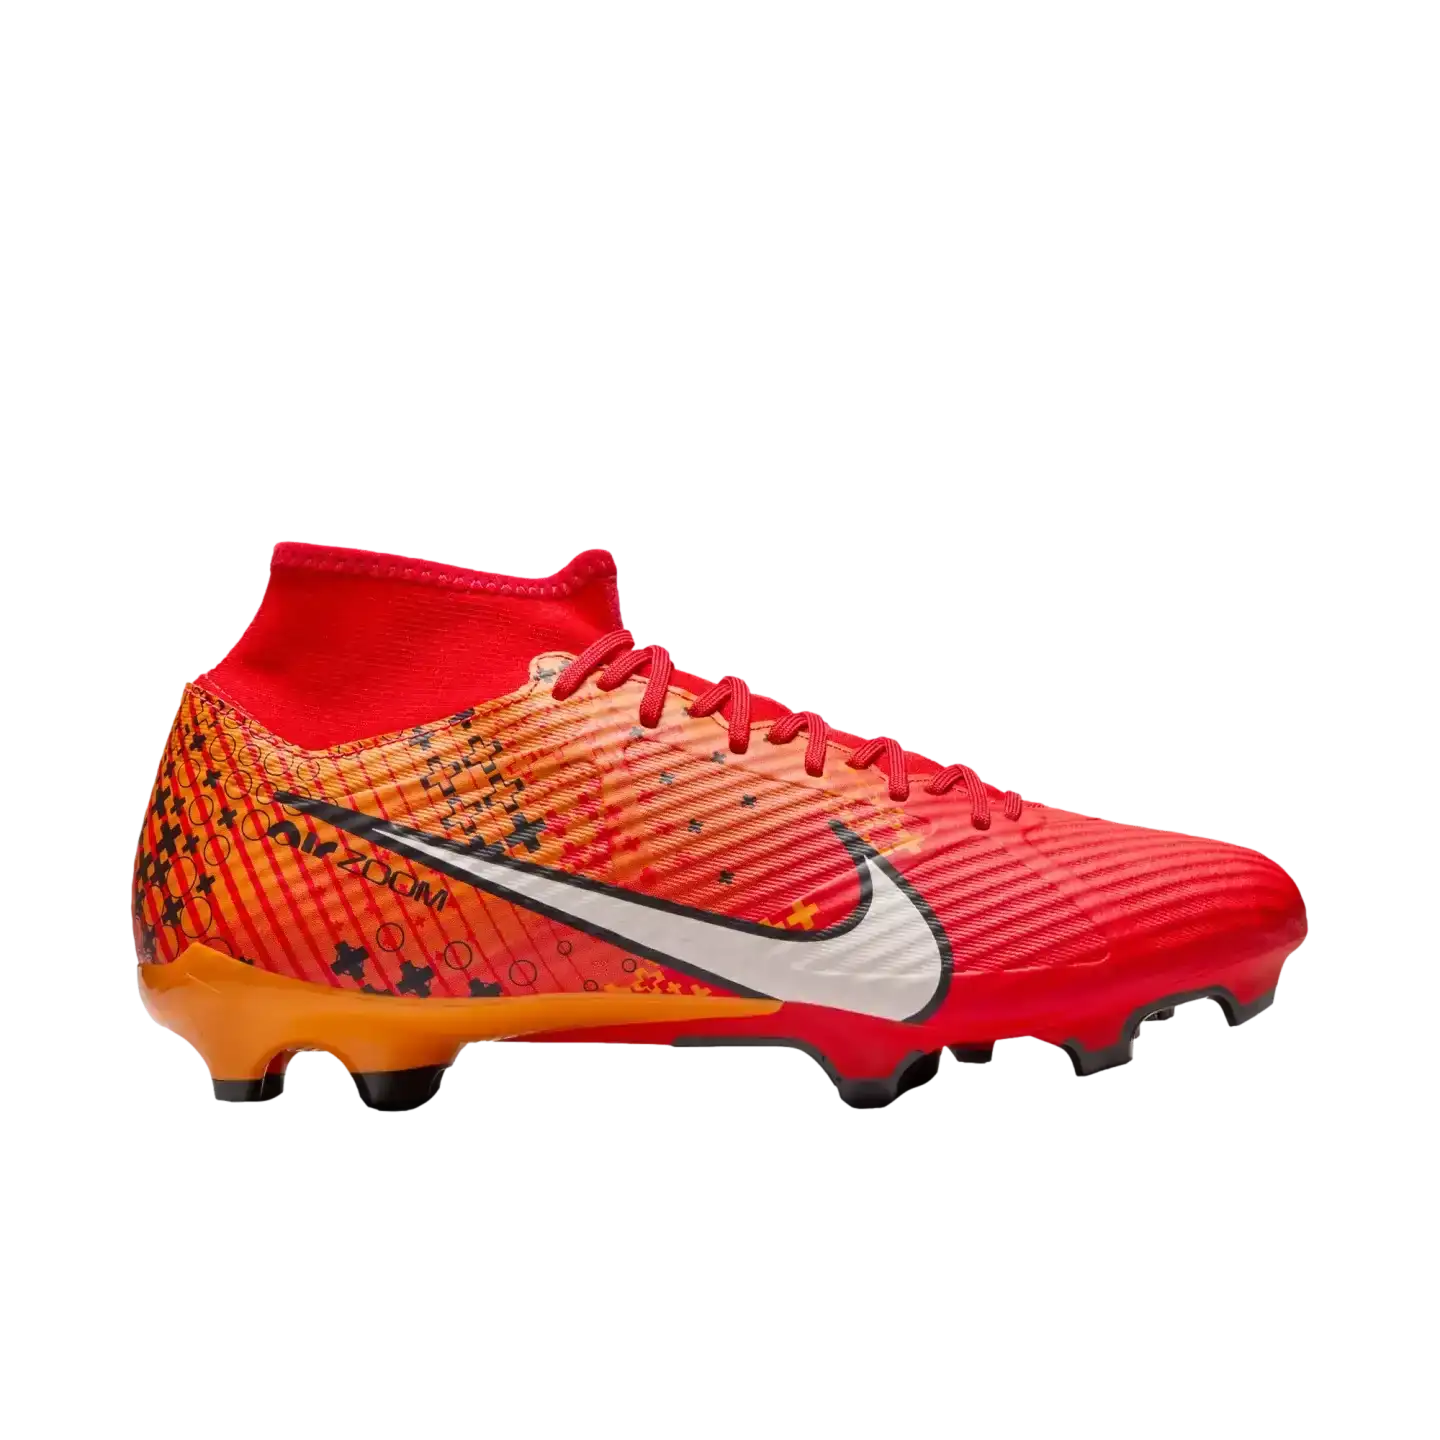 Image of (NIKE-FD1162-600) Nike Mercurial Superfly 9 Academy MDS Firm Ground Cleats [LT CRIMSON/PALE IVORY-BRIGHT MANDARIN] (Launch 11/16/23)